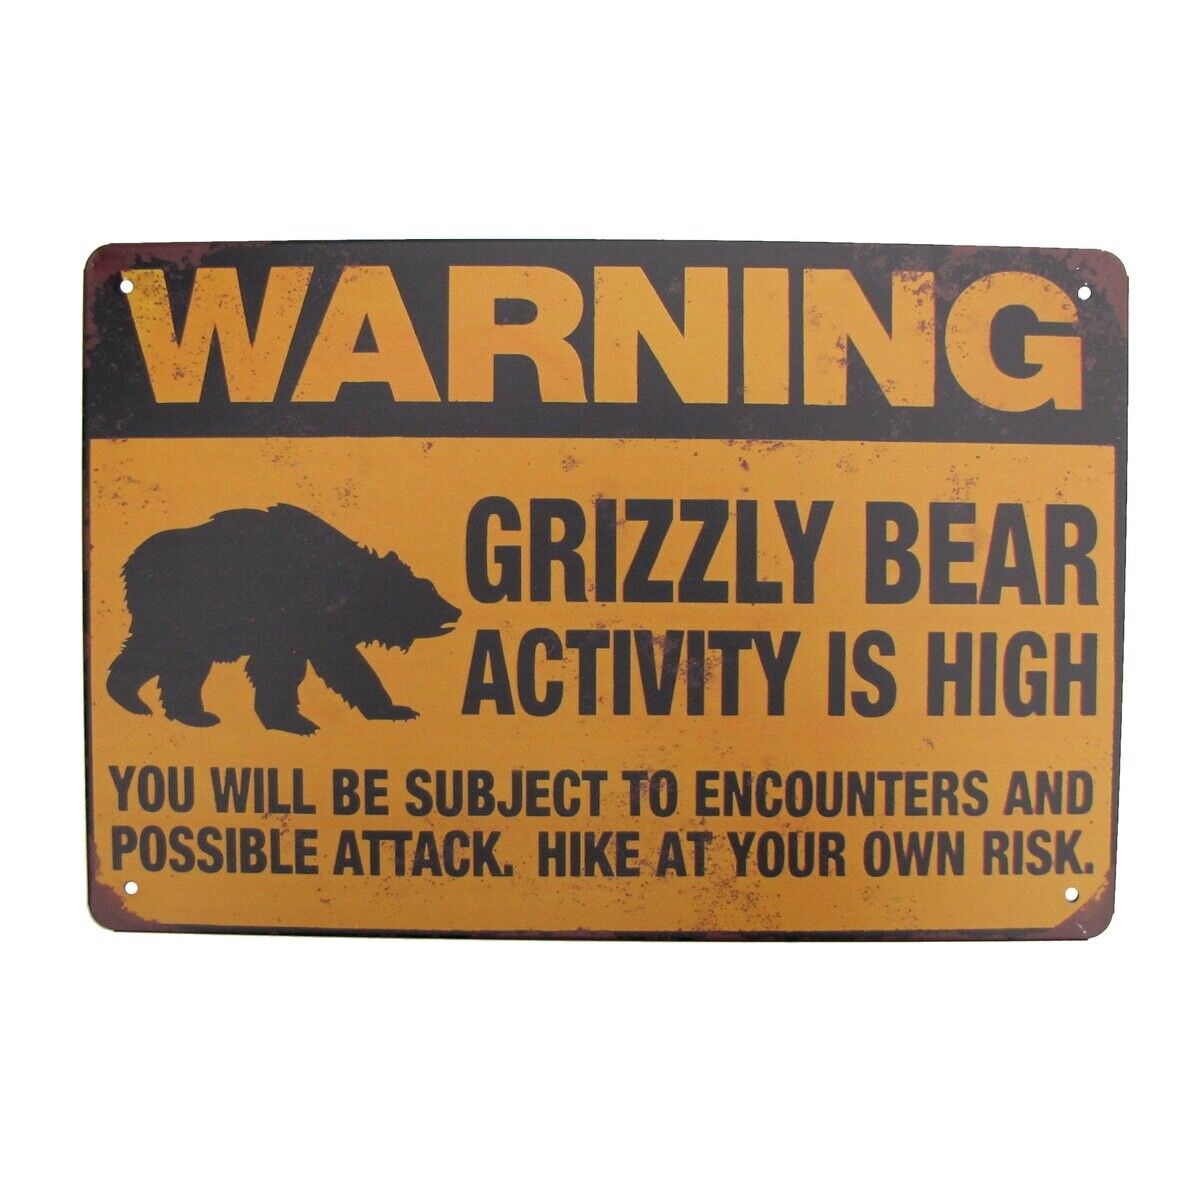 Metal Grizzly Bear Activity Warning Caution Wall Sign Outdoor Cabin Garage Decor